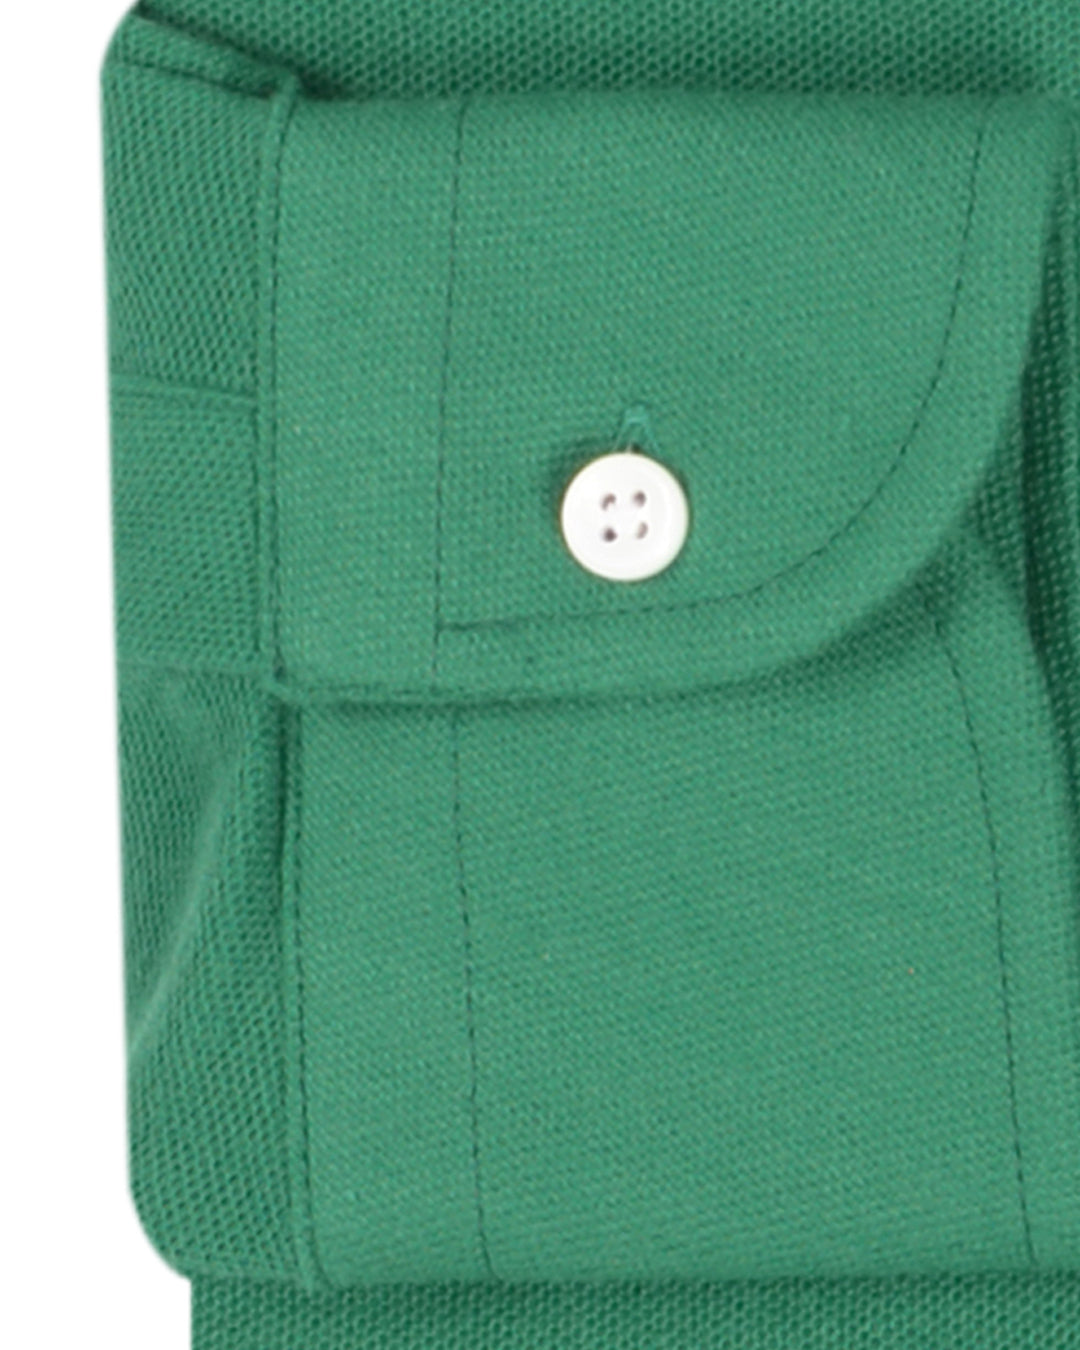 Cuff of the custom oxford polo shirt for men by Luxire in emerald green